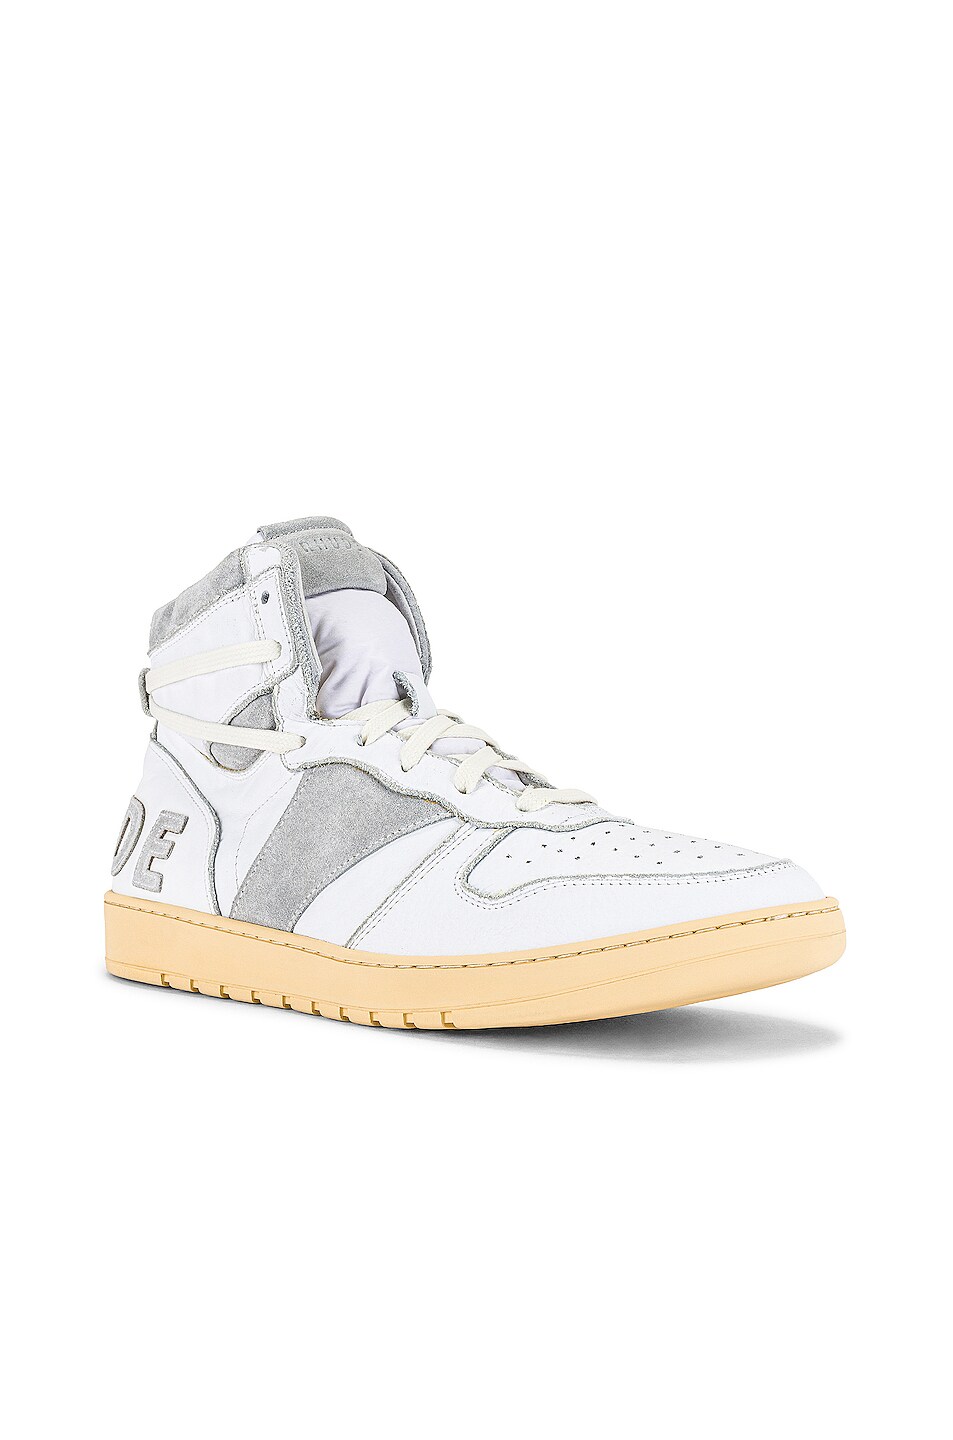 Image 1 of Rhude Bball Hi Sneaker in White Leather & Grey